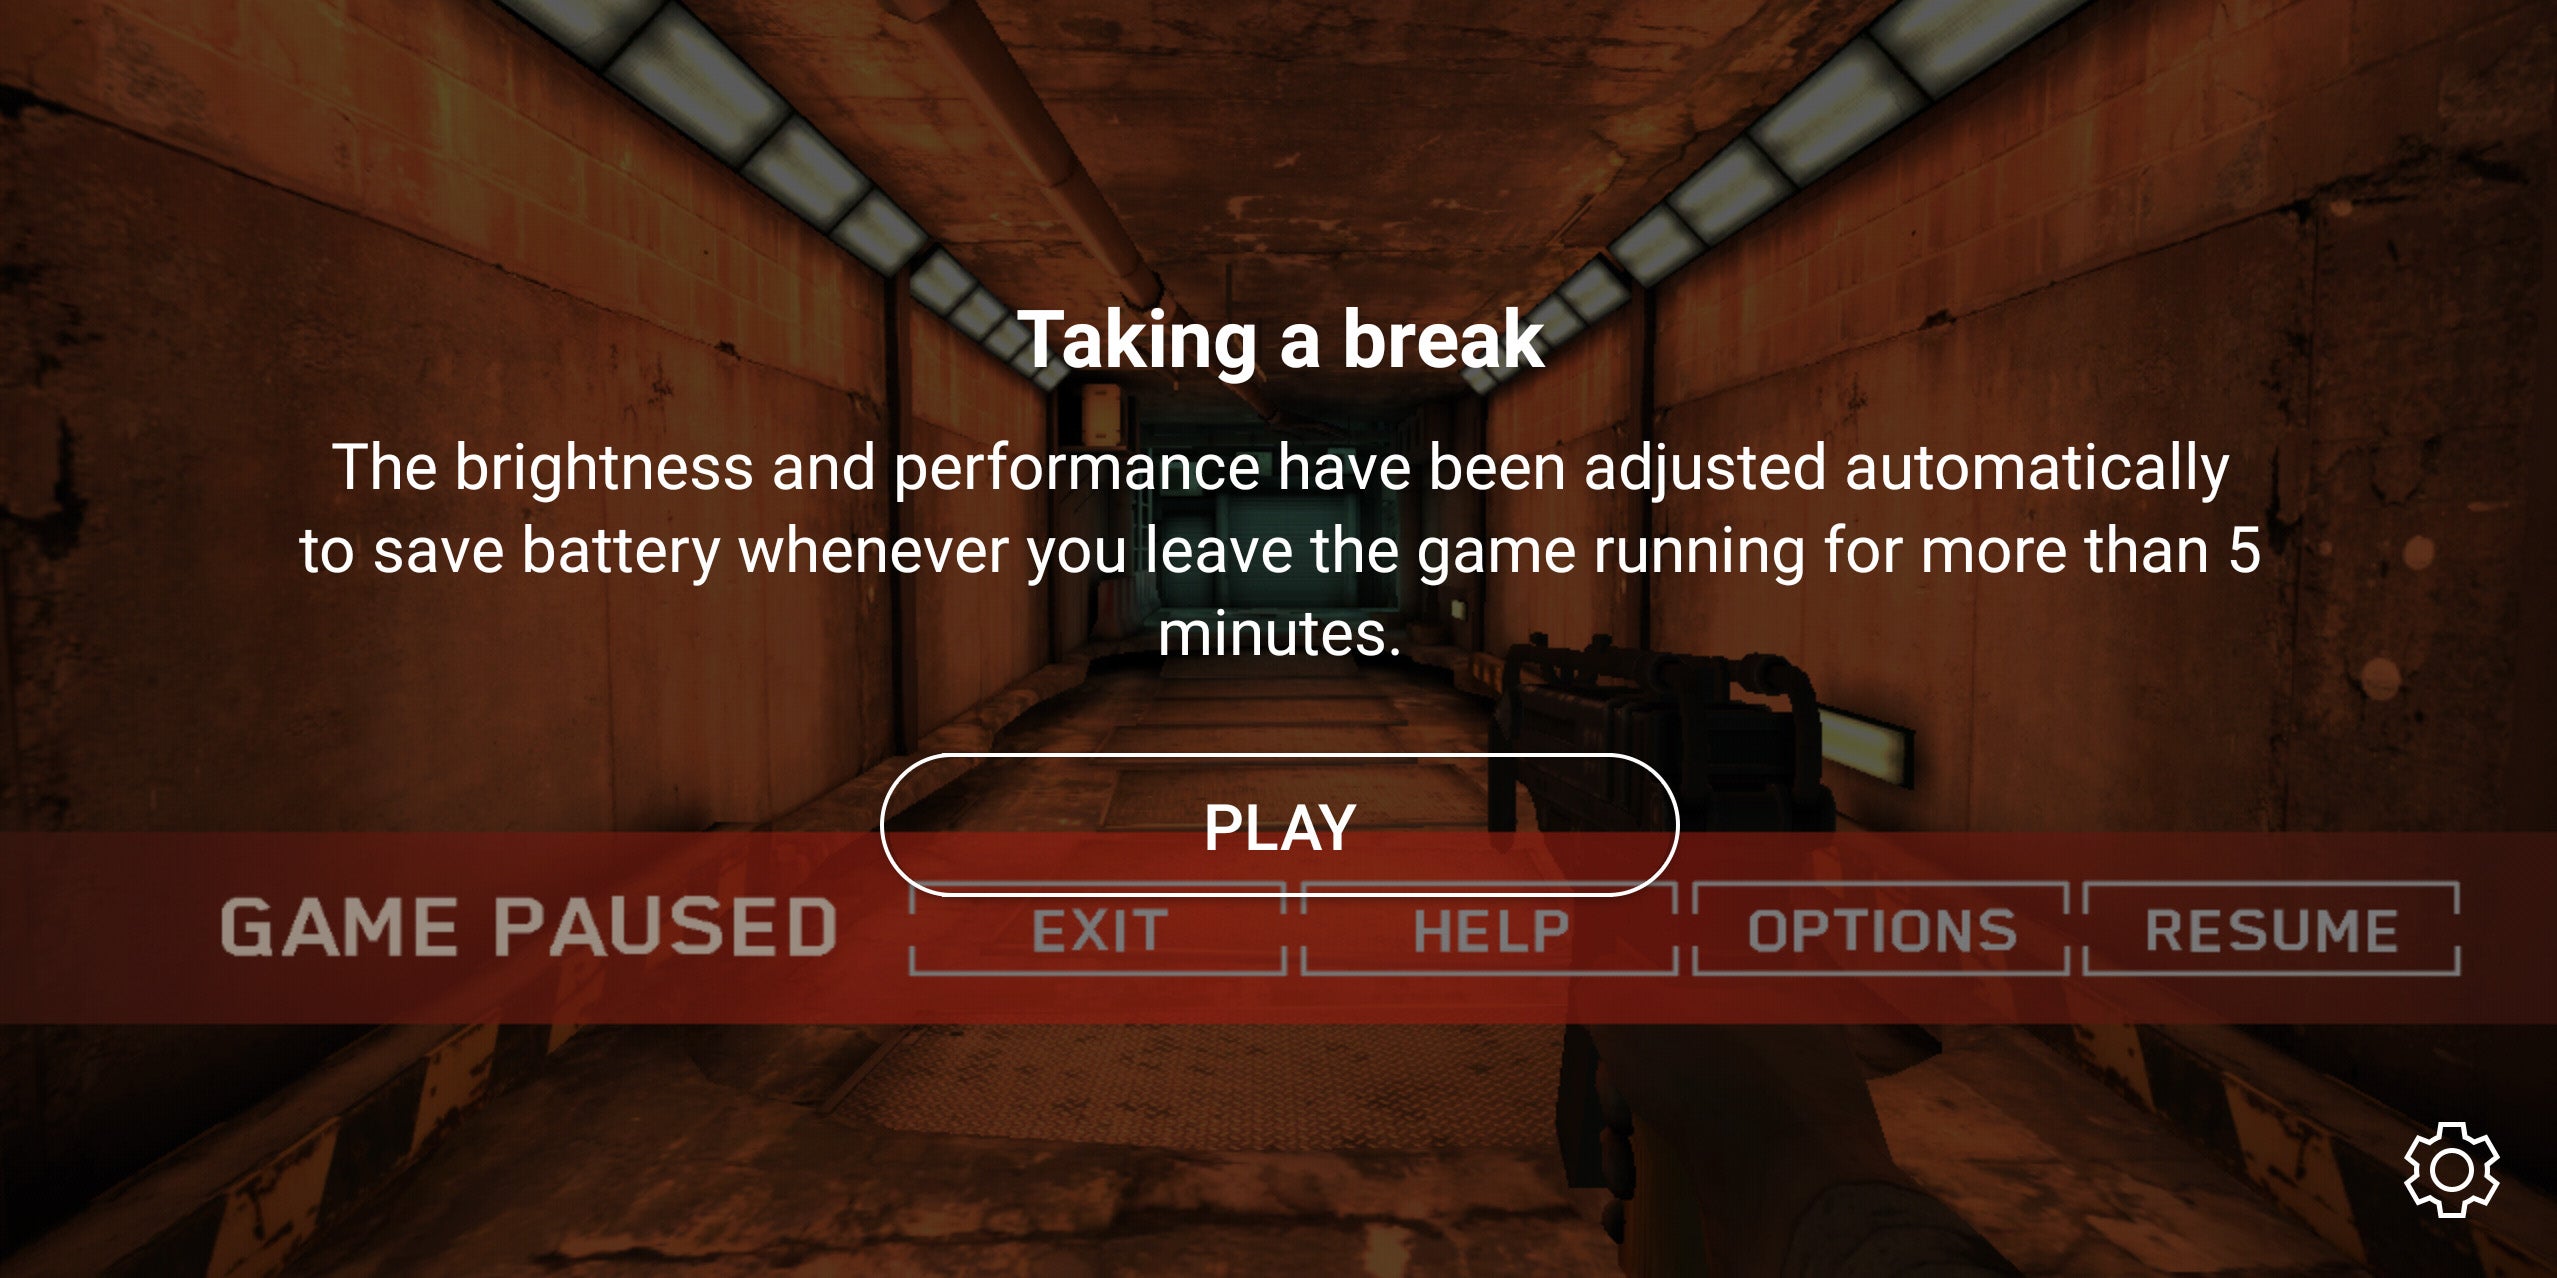 There are times when you simply can't quit your game but can't keep on playing, either. That's where the Take a break feature comes in handy - LG V30's "Game Tools": What is it and how to use it?